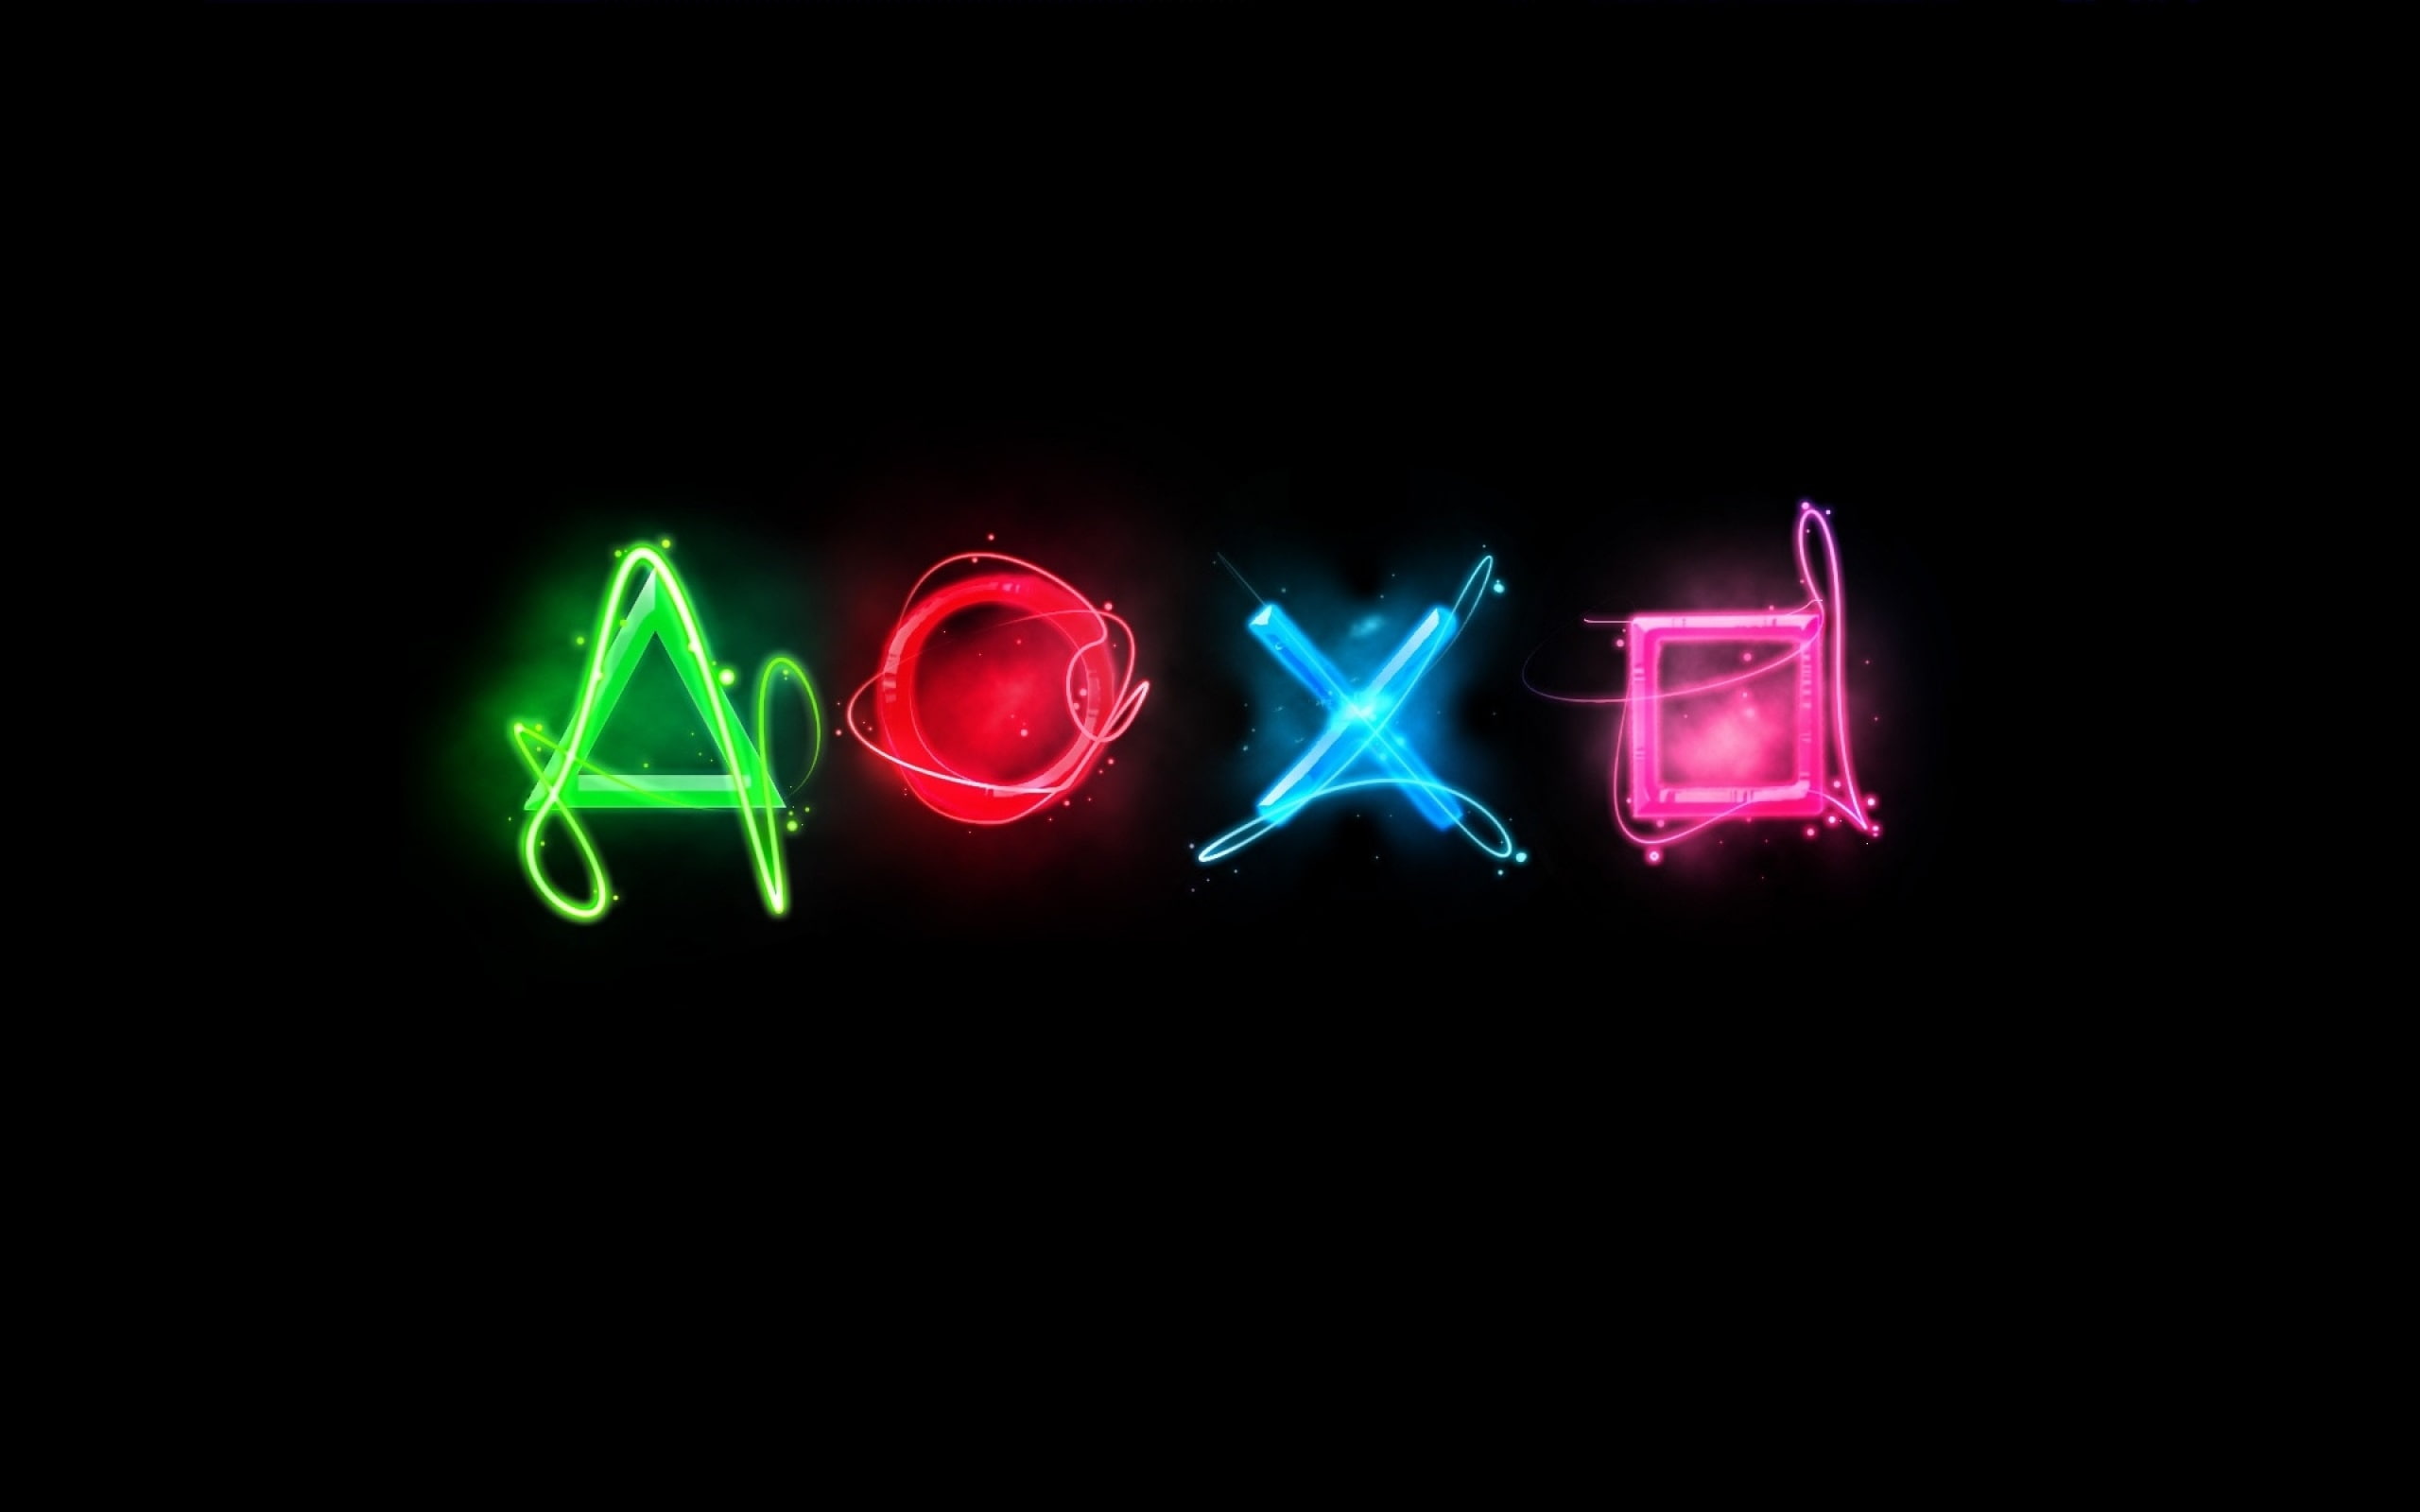 Playstation colorful logo, black background, game console controller button icons